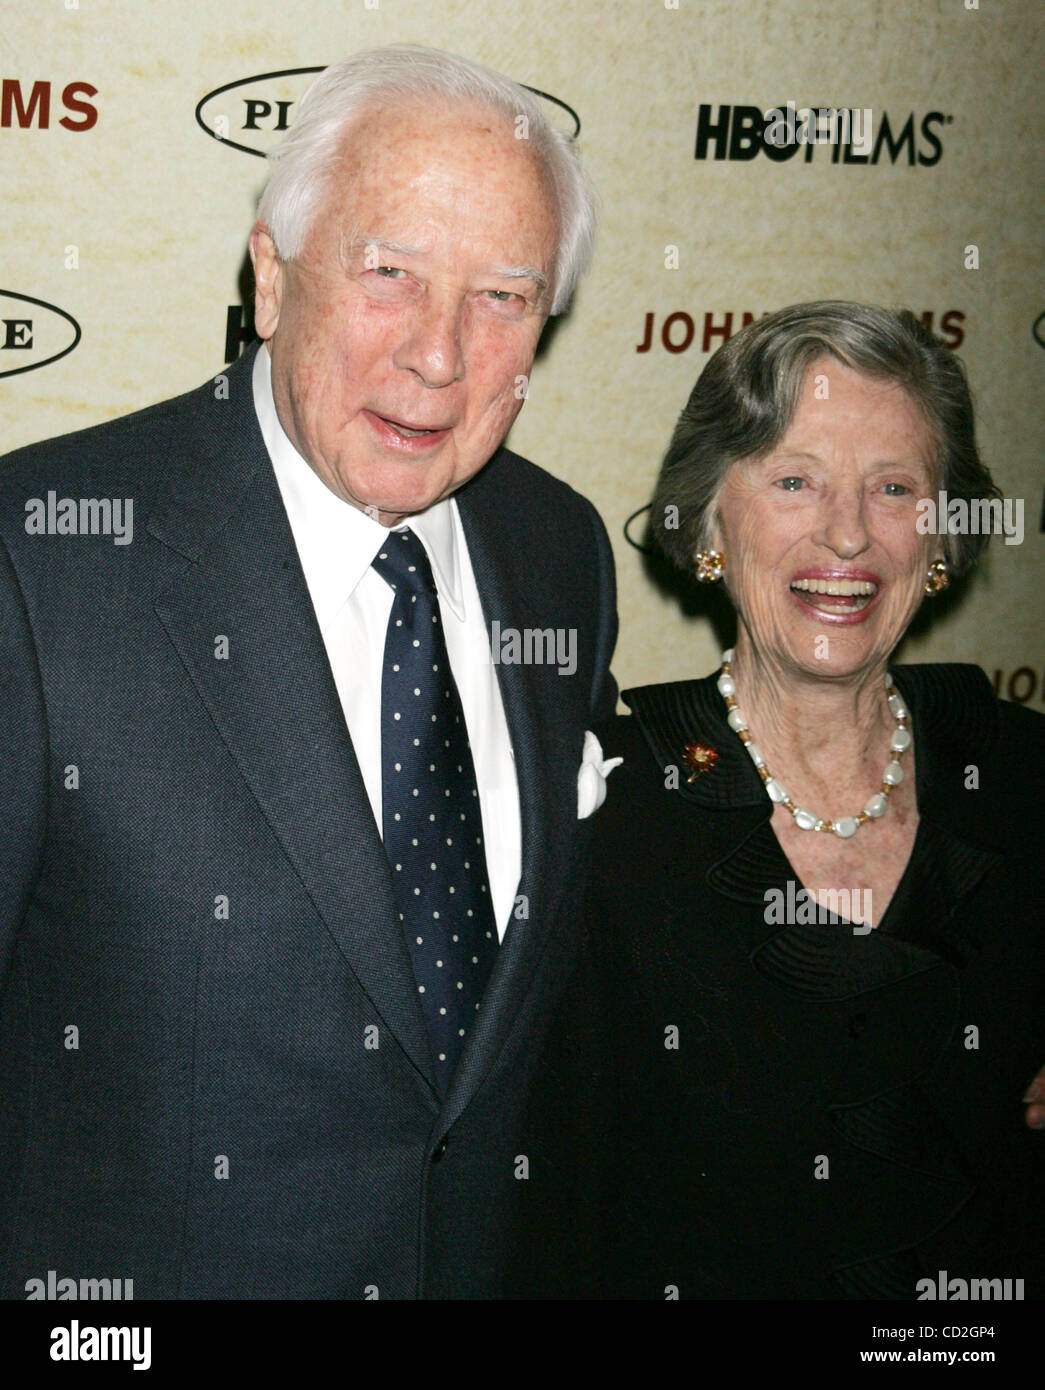 Mar 03, 2008 - New York, NY, USA - Author DAVID MCCULLOUGH and his WIFE at the New York premiere of HBO's 'John Adams' held at the Museum of Modern Art. (Credit Image: © Nancy Kaszerman/ZUMA Press) Stock Photo